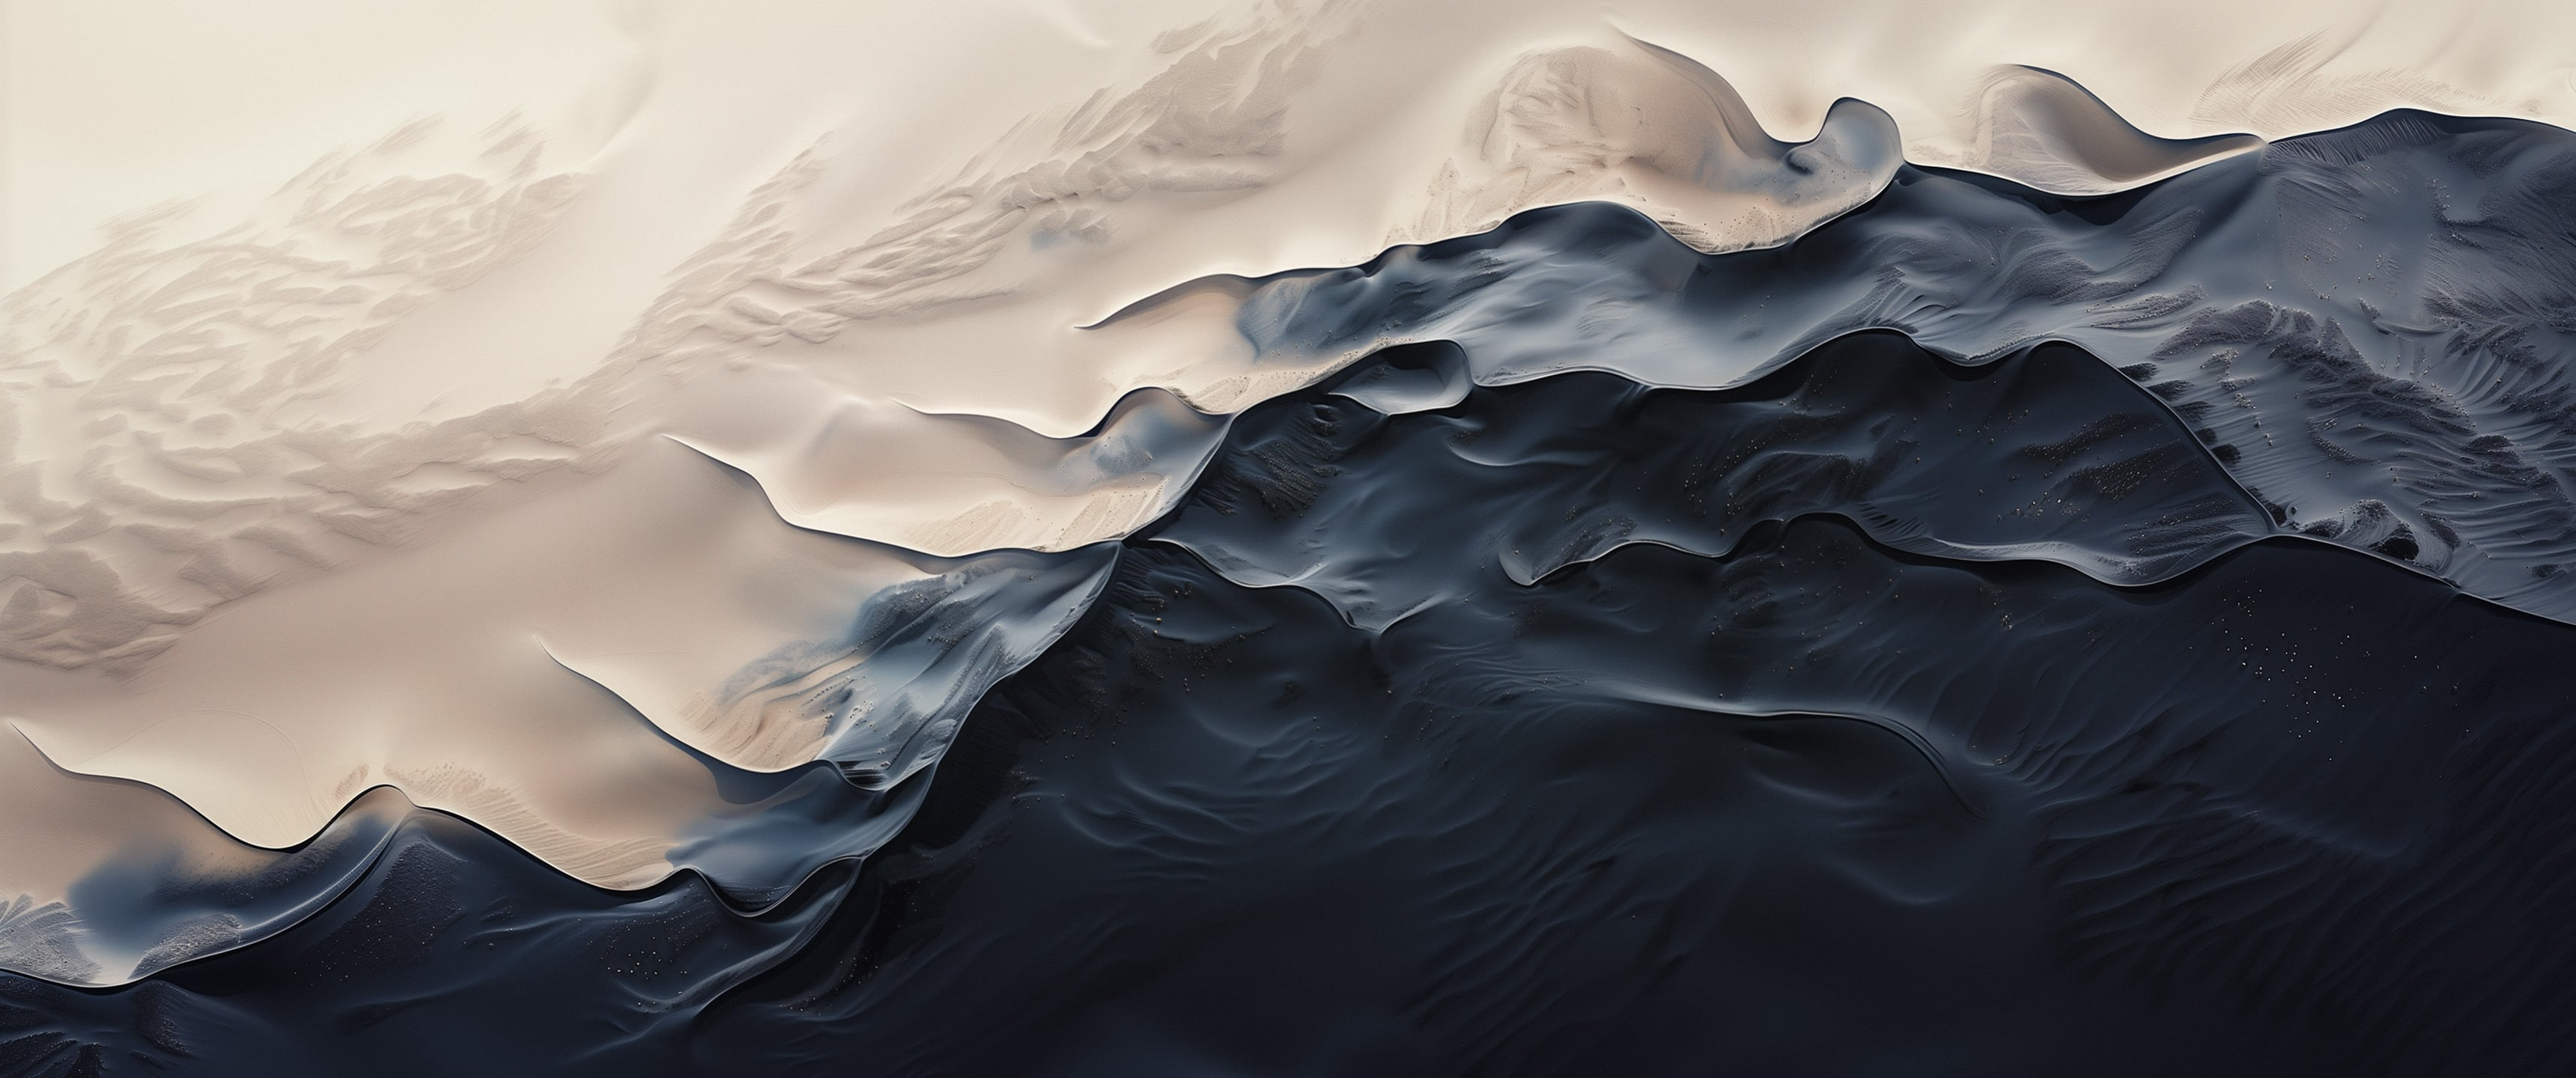 General 3440x1440 dunes AI art abstract